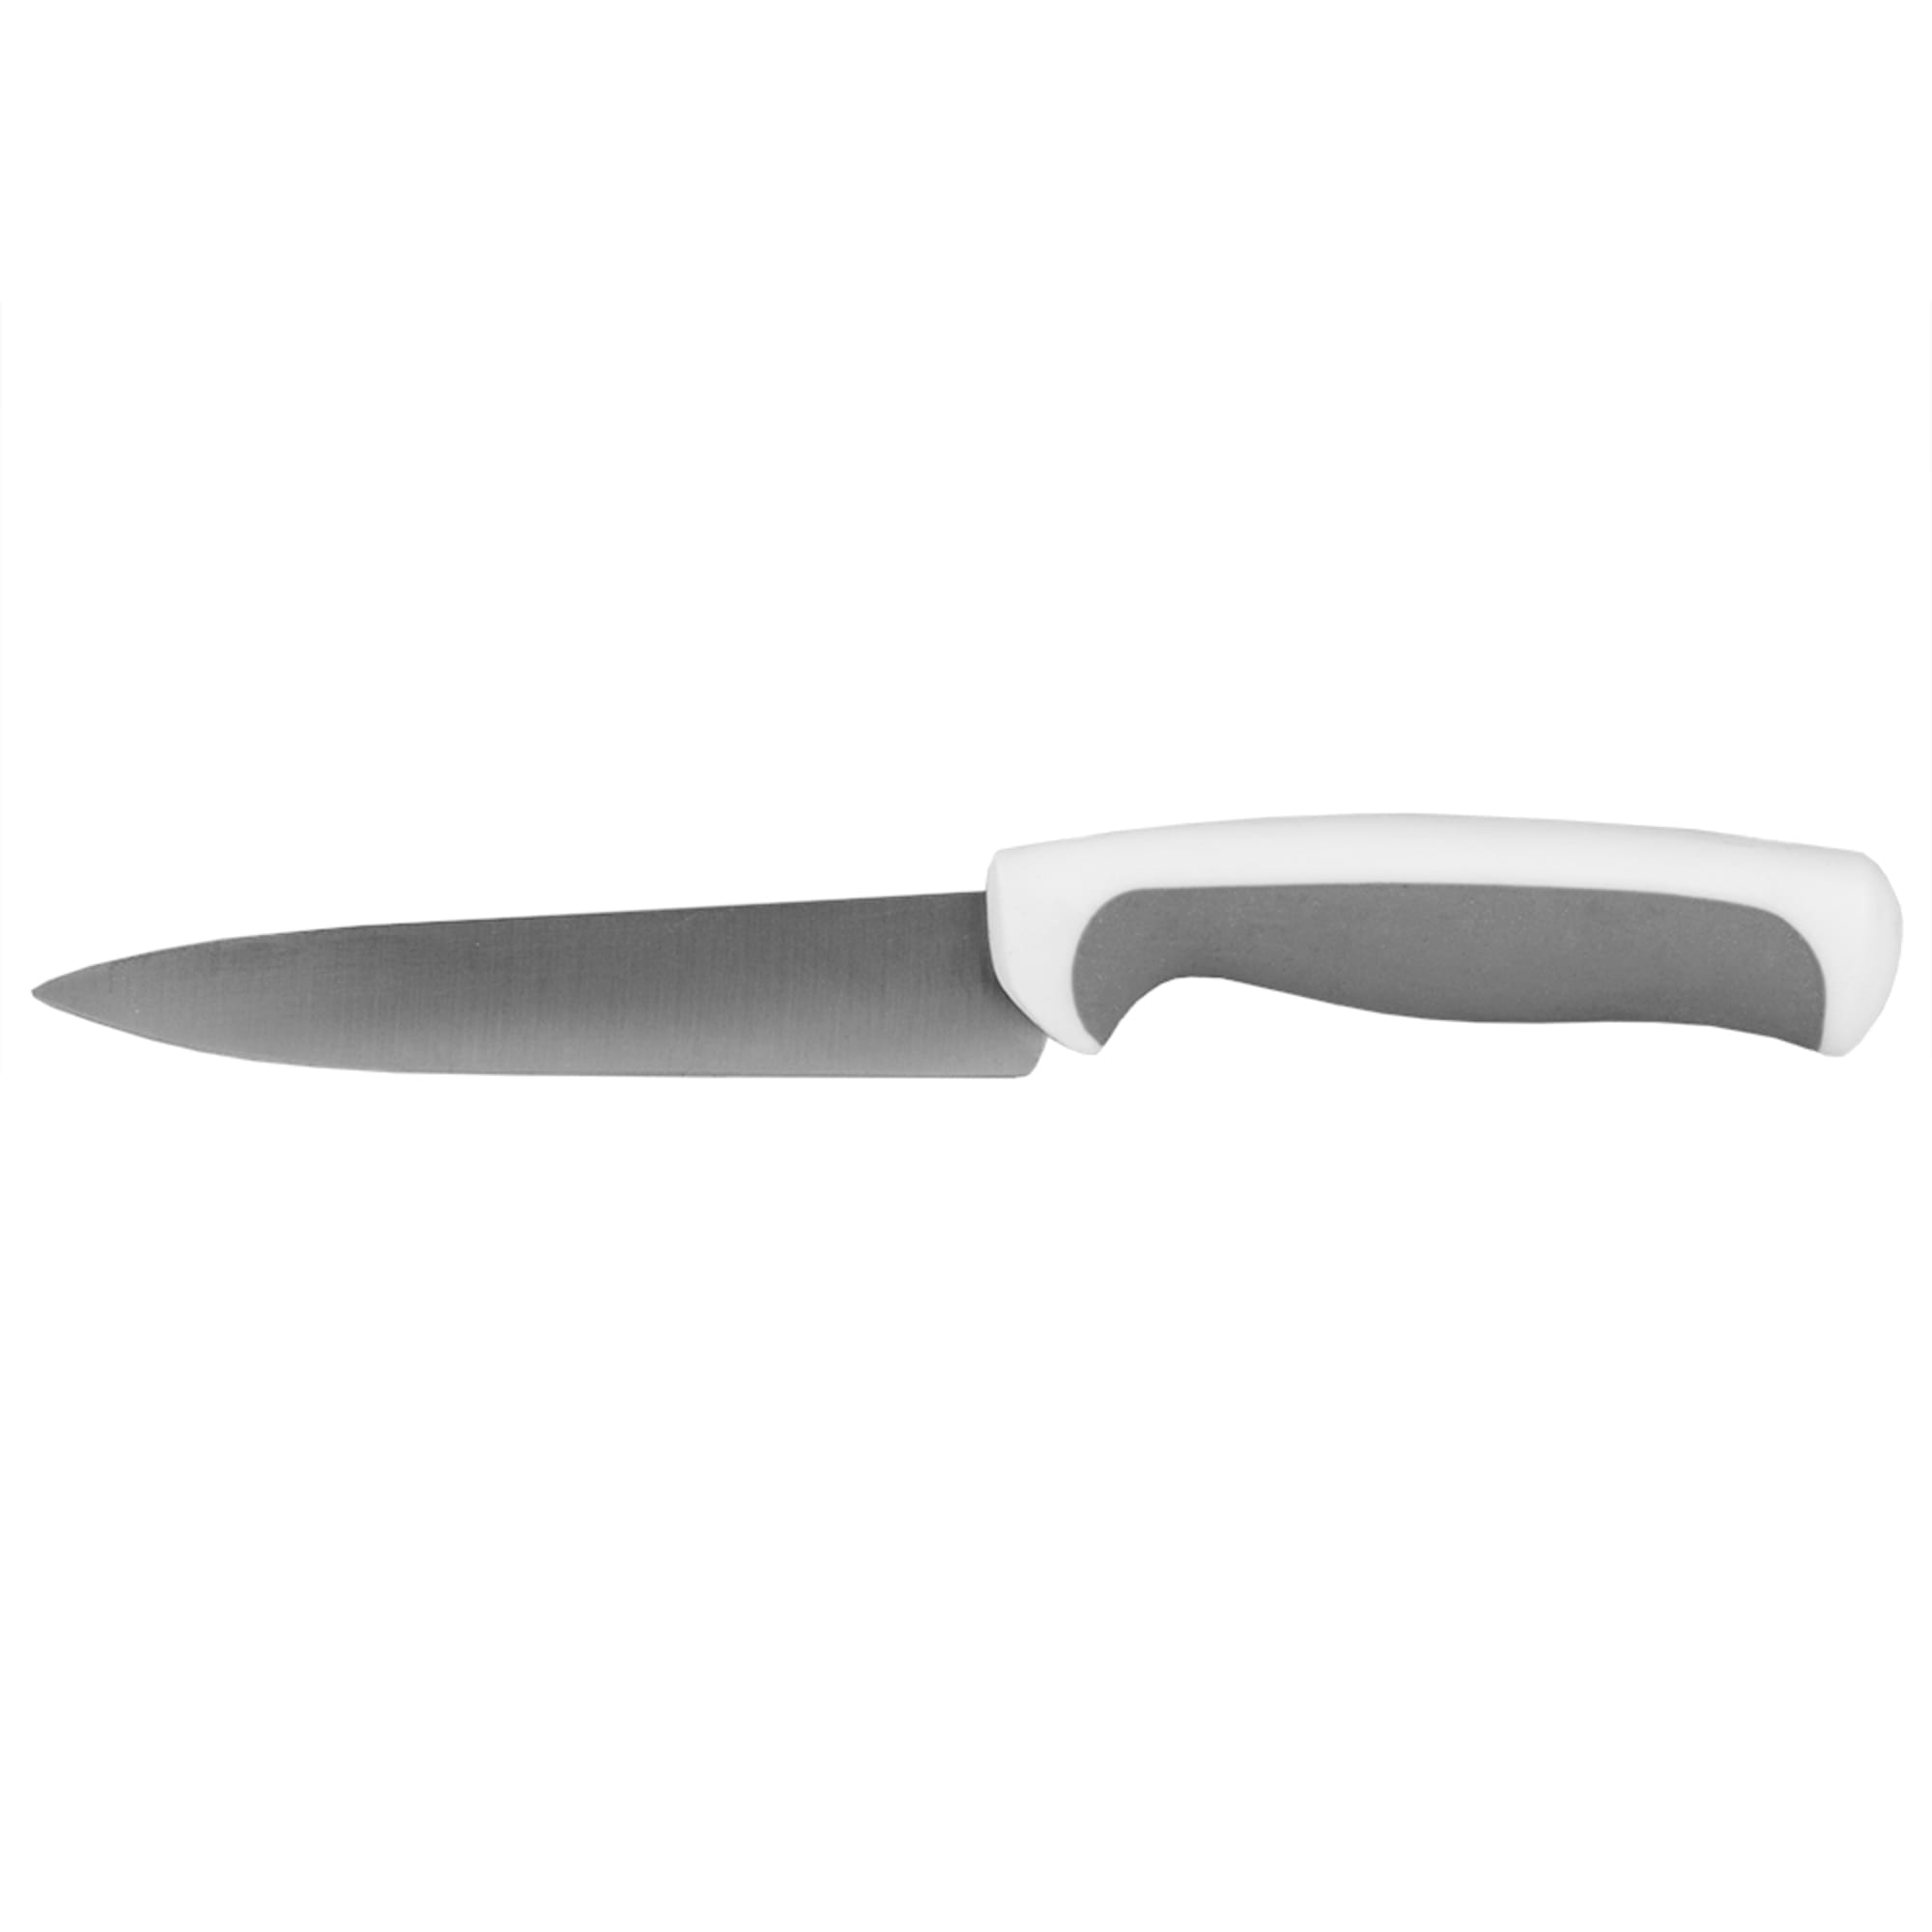 Home Basics Stainless Steel 3 Piece Knife Set $3.00 EACH, CASE PACK OF 12